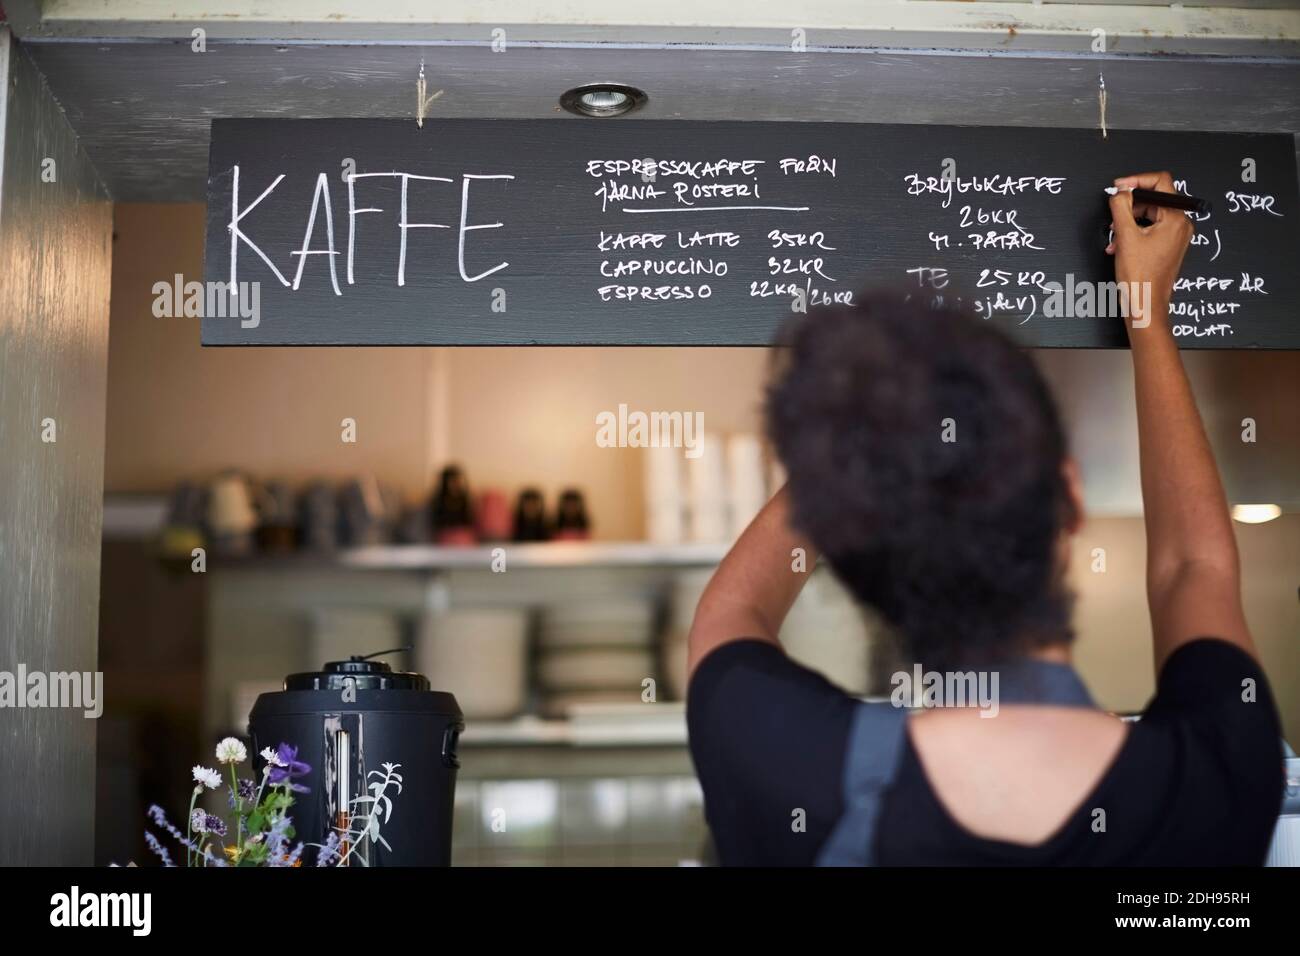 Rear view of waitress writing on blackboard at cafe Stock Photo